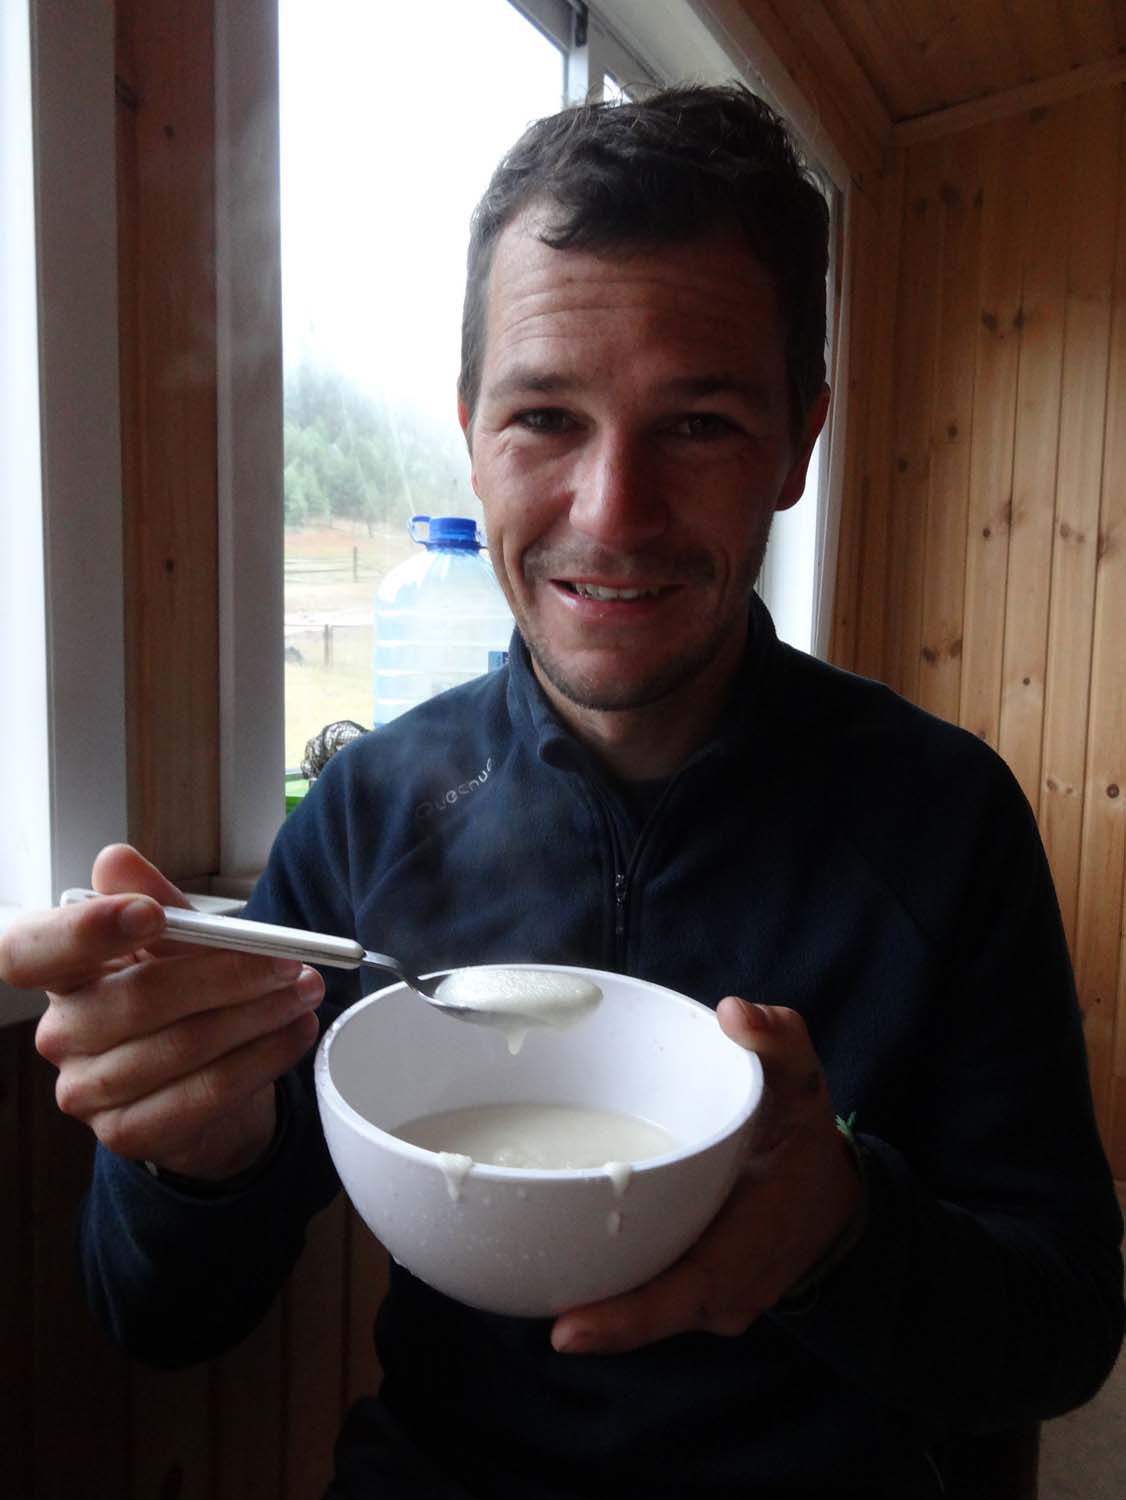 Jon eats porridge (kasha) for the first time in 10 years and decides it's not so bad after all...